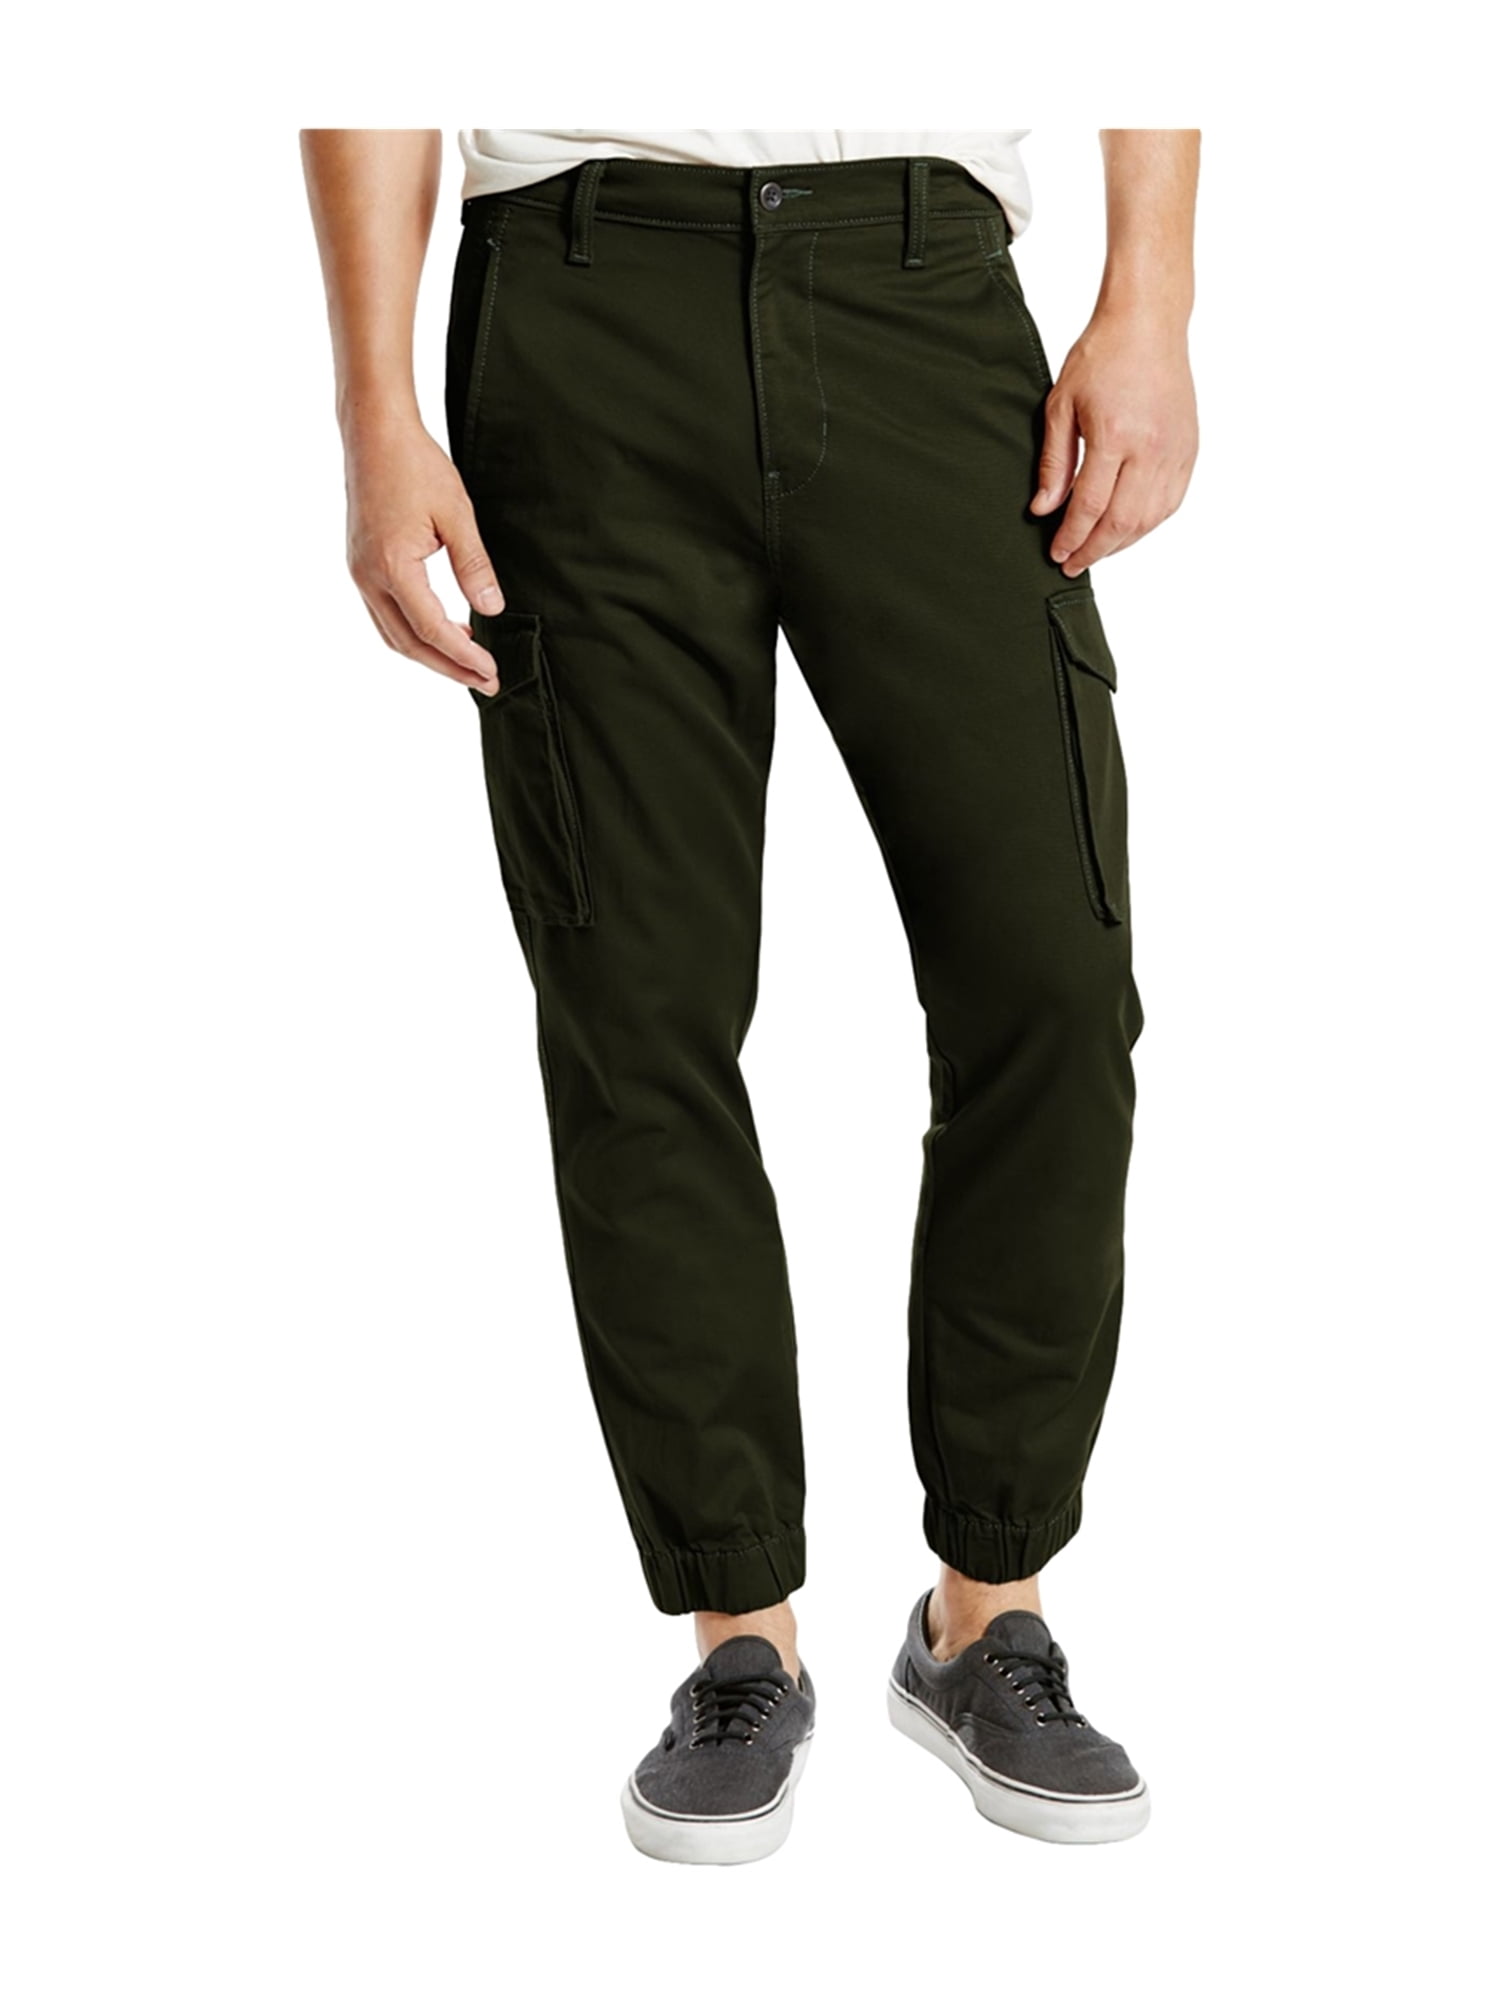 Levi's Mens Slim Banded Cargo Casual Jogger Pants rosintwill 32x30 ...